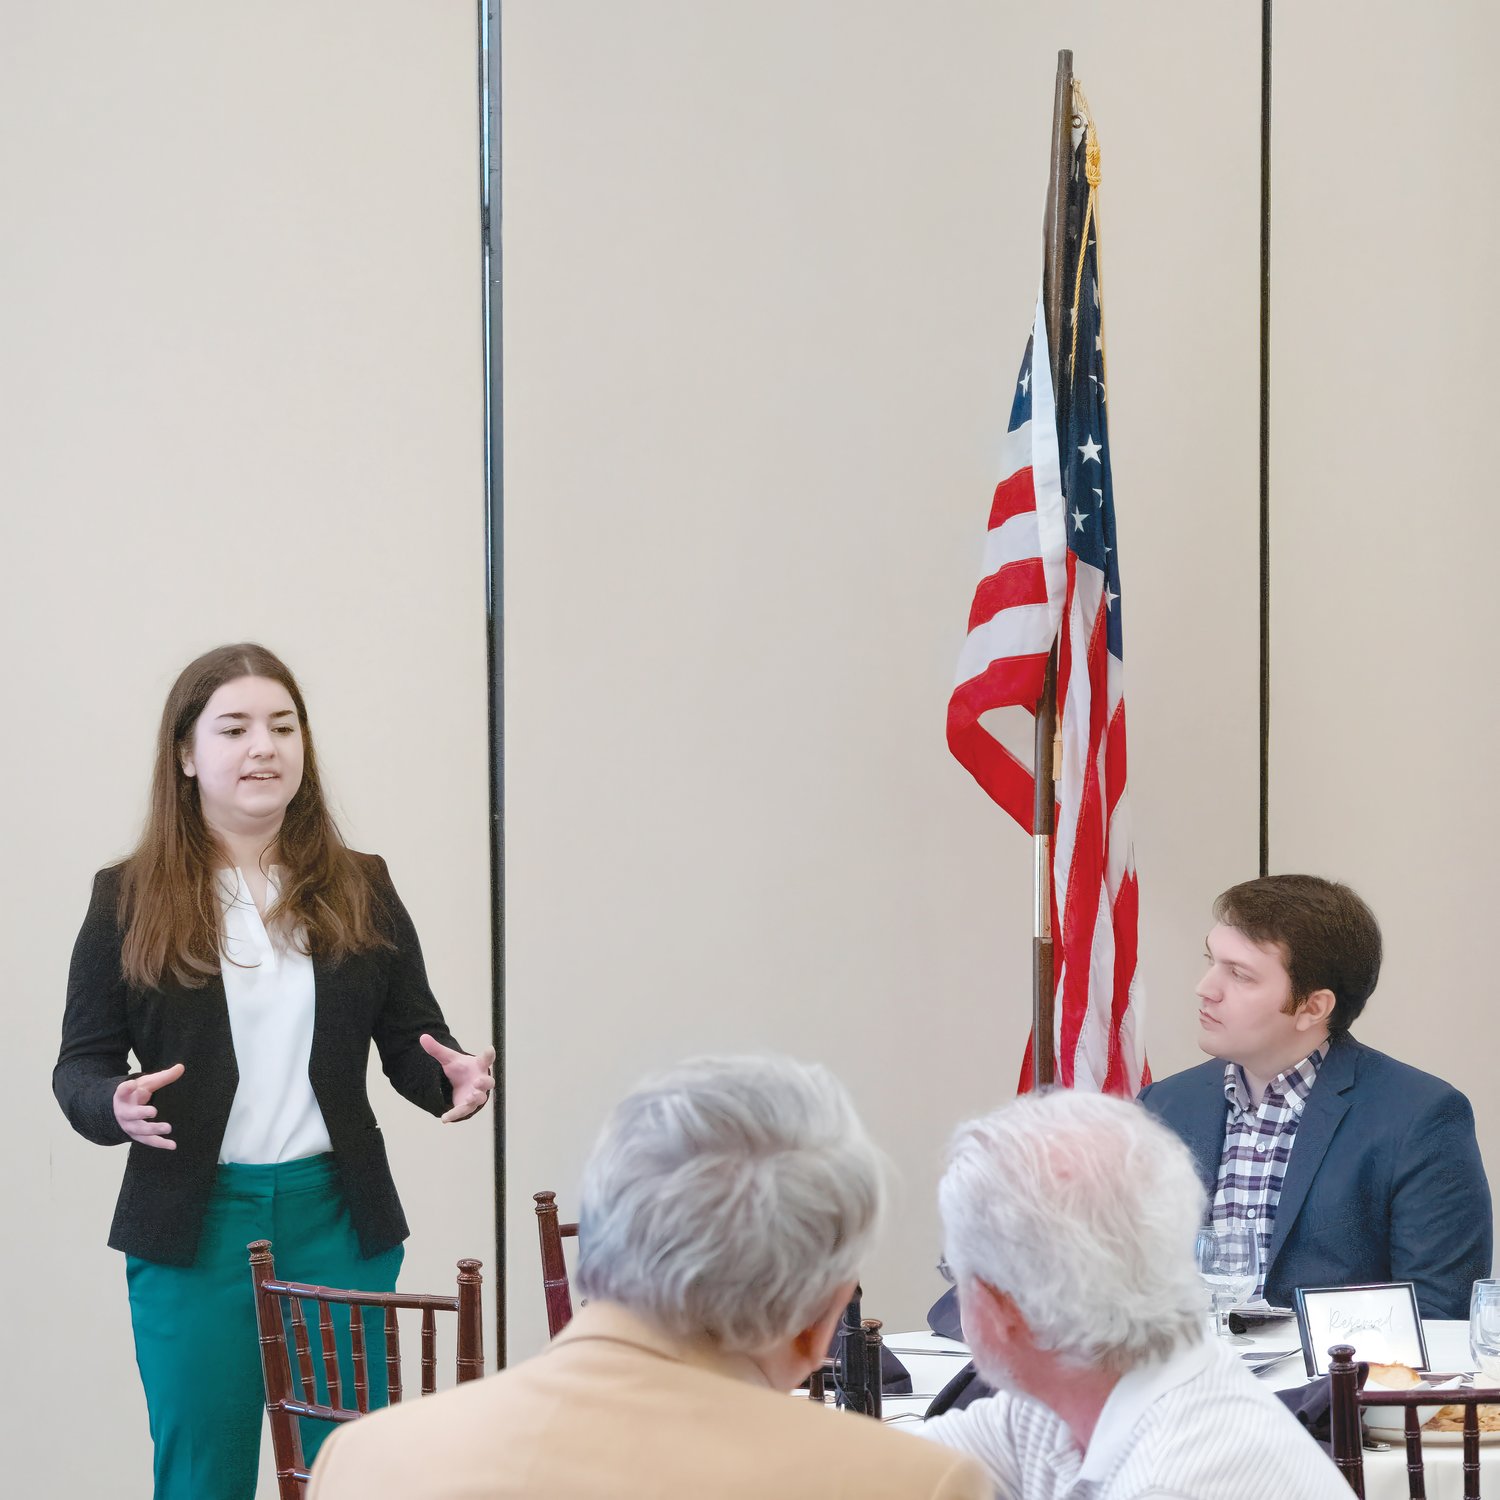 Lily Kate Witcher presents her winning oration at SAR Rumbaugh Oratory competition at Governors Club.